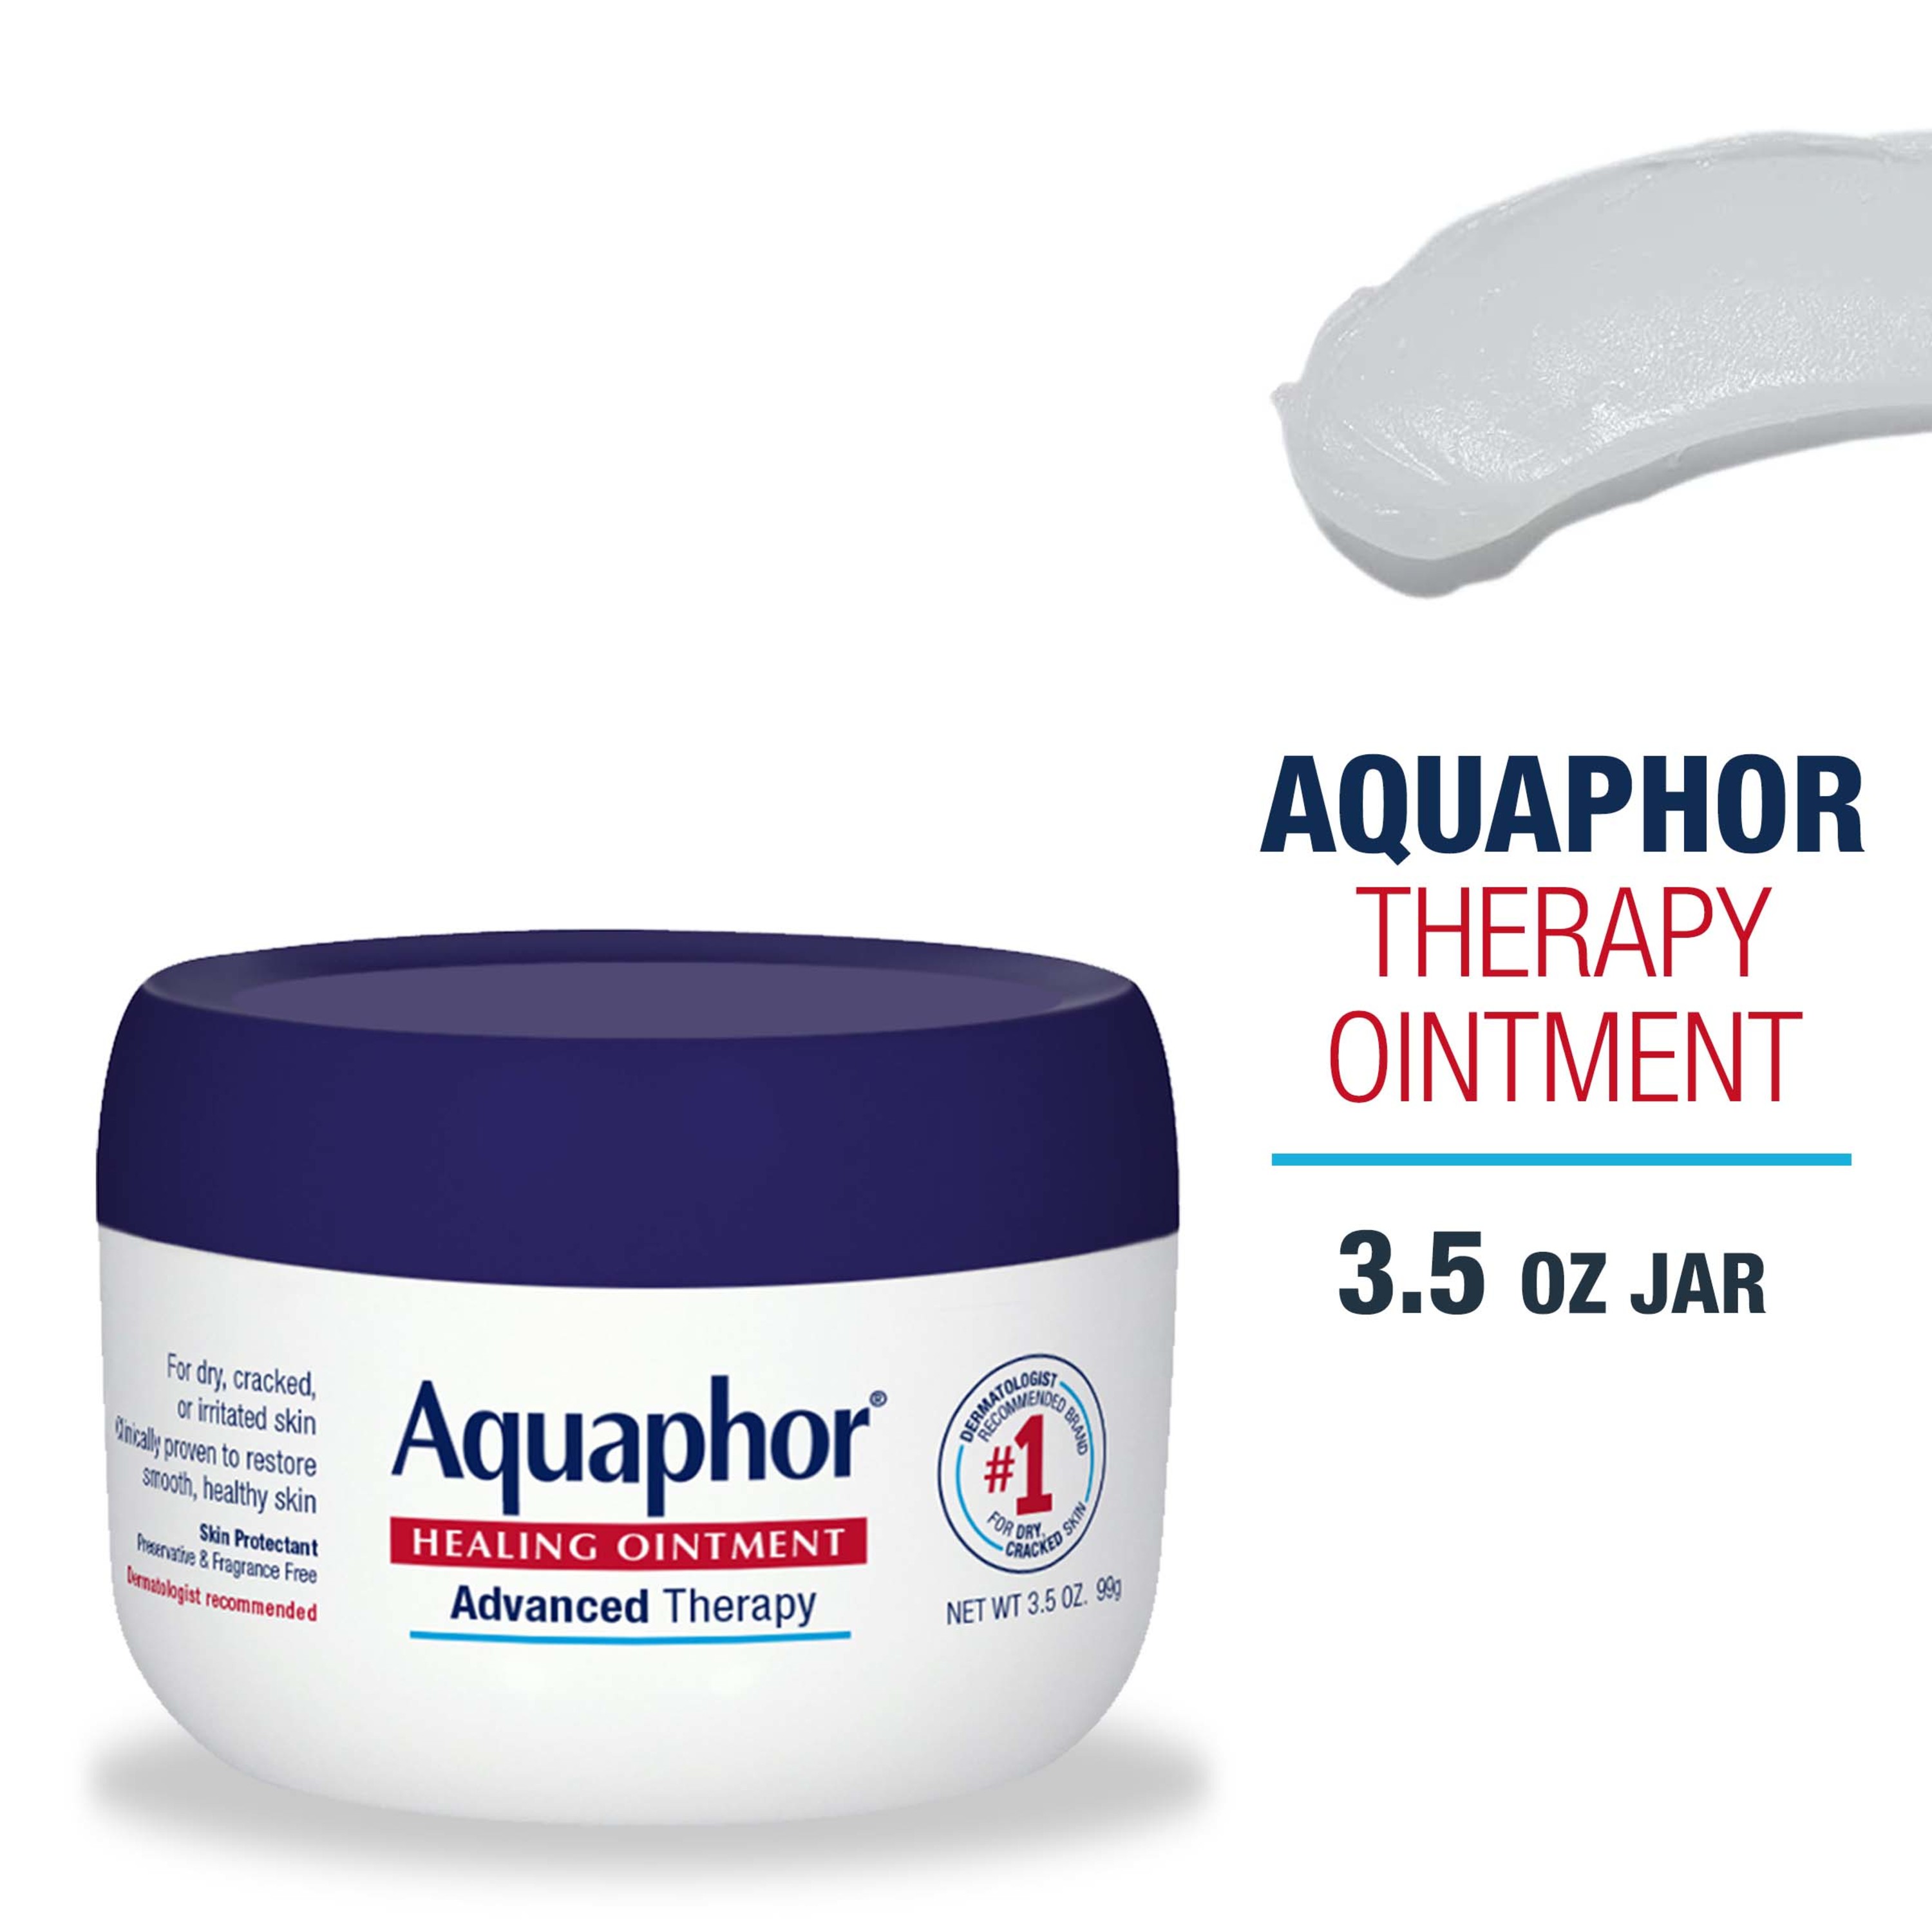 Aquaphor Healing Ointment Advanced Therapy Skin Protectant, 3.5 Oz Jar - image 3 of 19